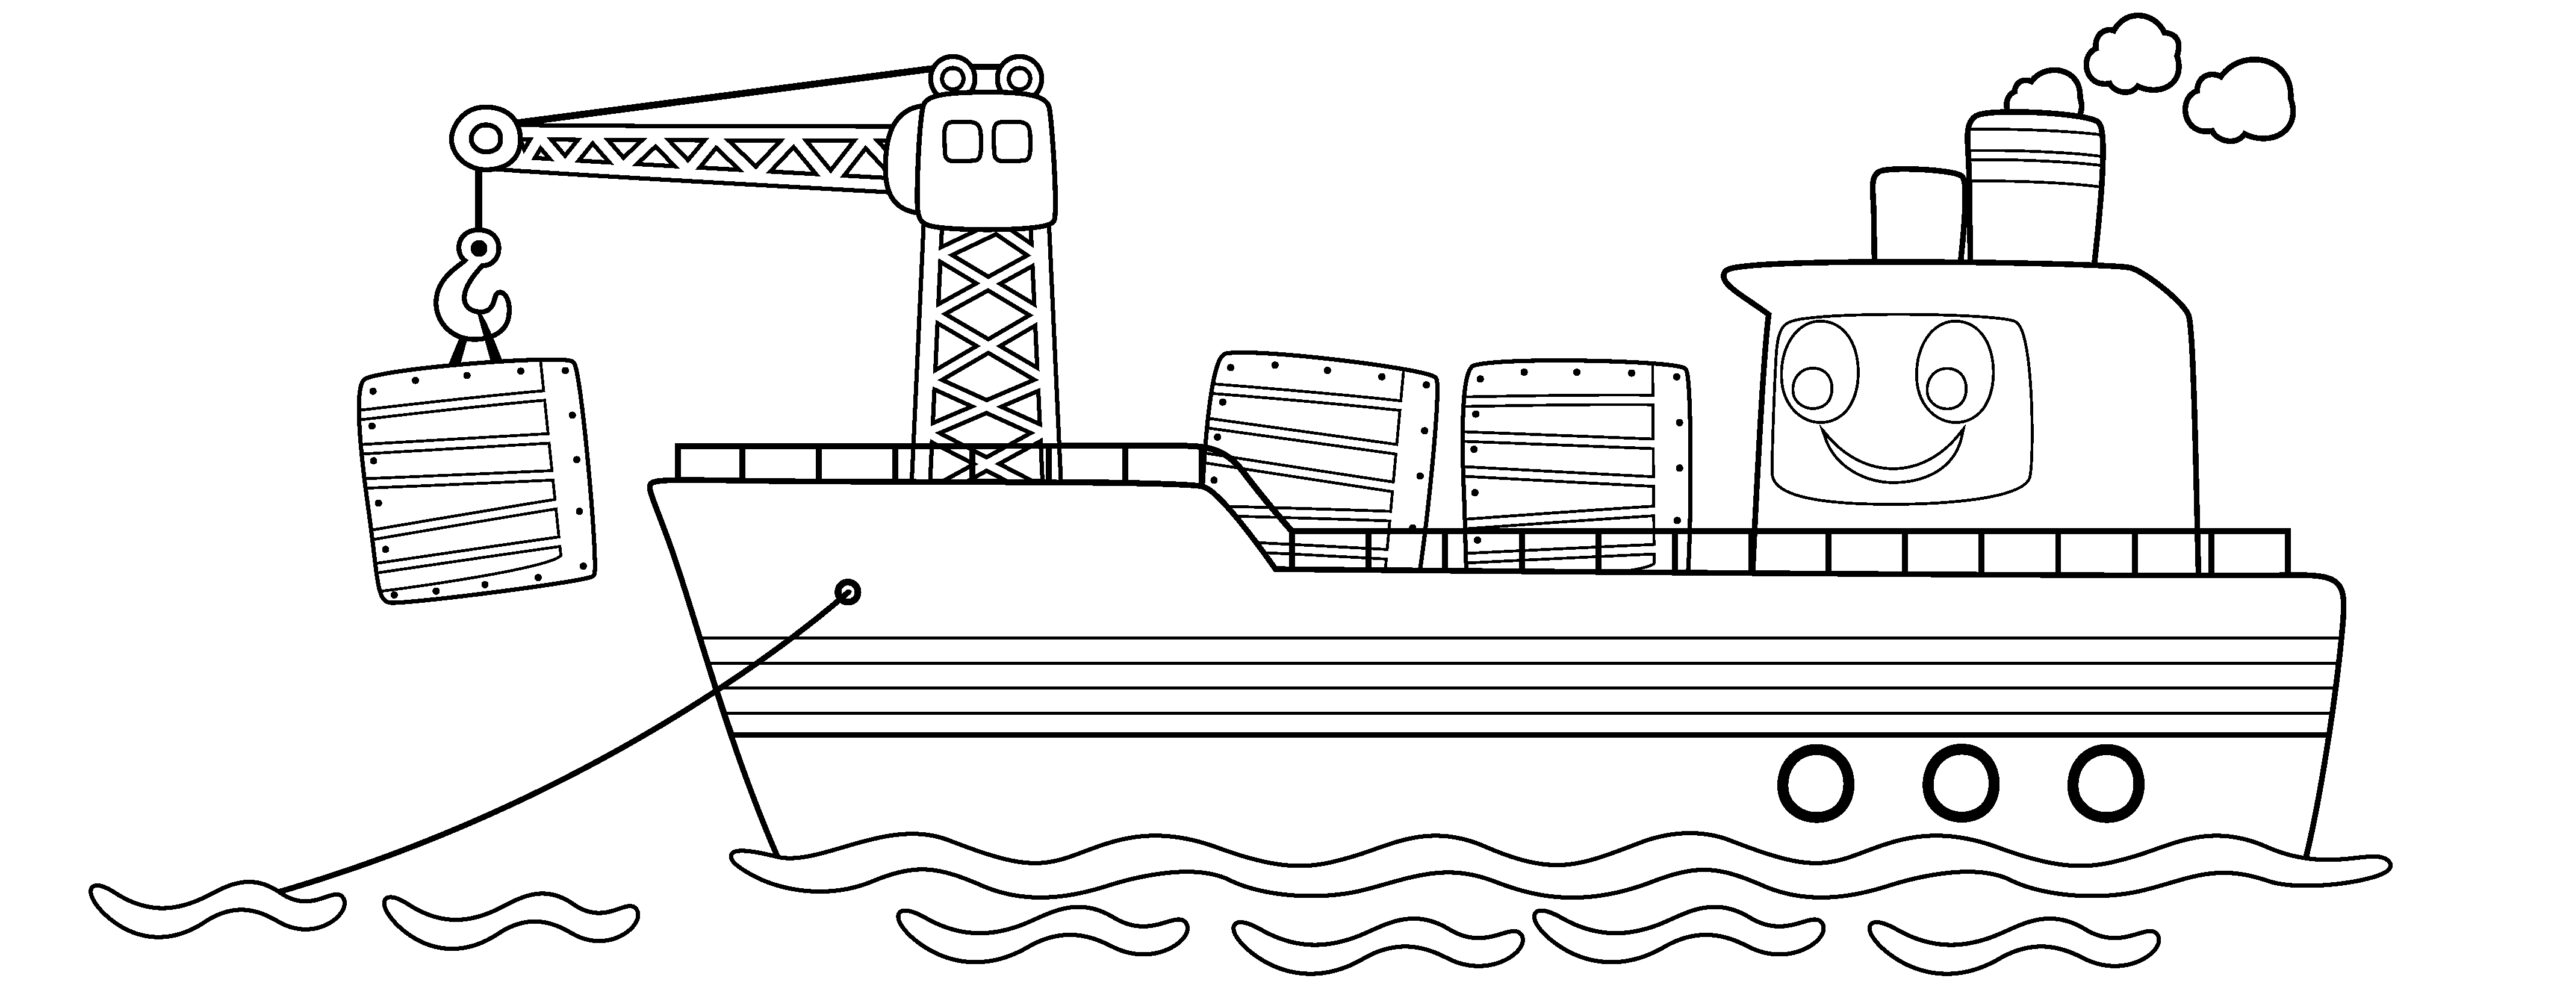 Real Speed Boat coloring page for kids, transportation coloring pages  printables free - Wuppsy.com